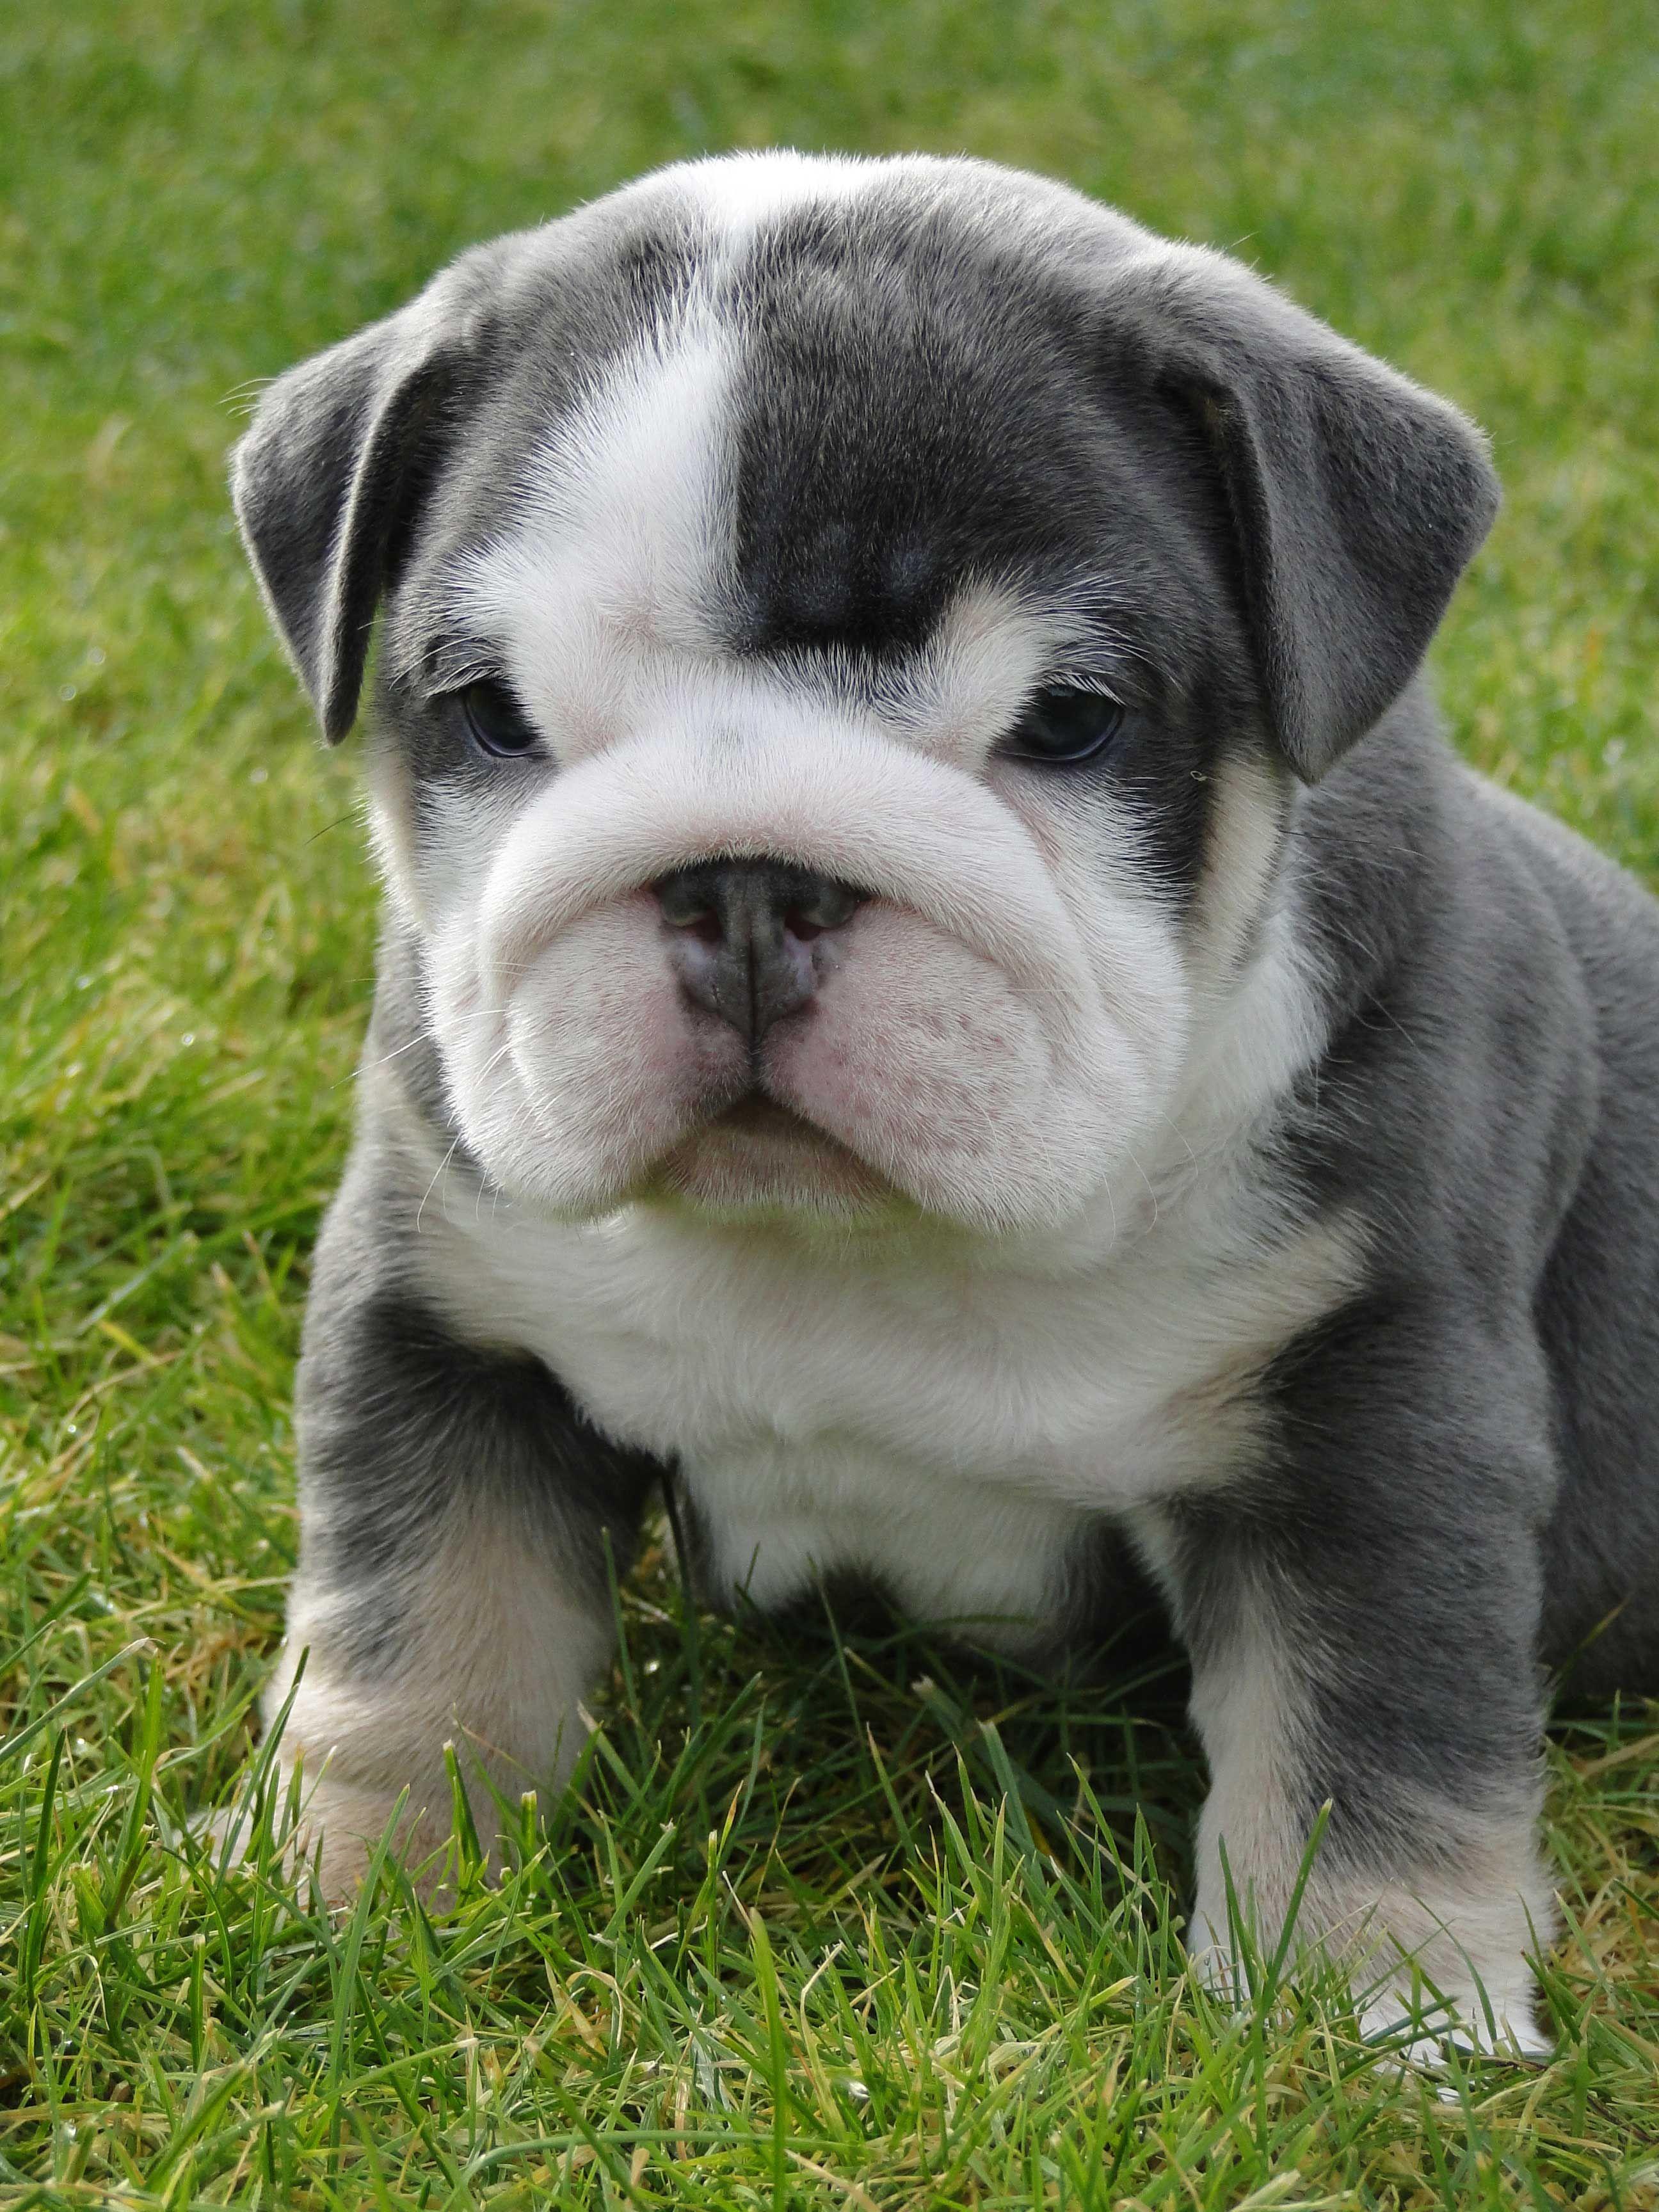 List Different Types of Bulldogs Breeds. Cute animals